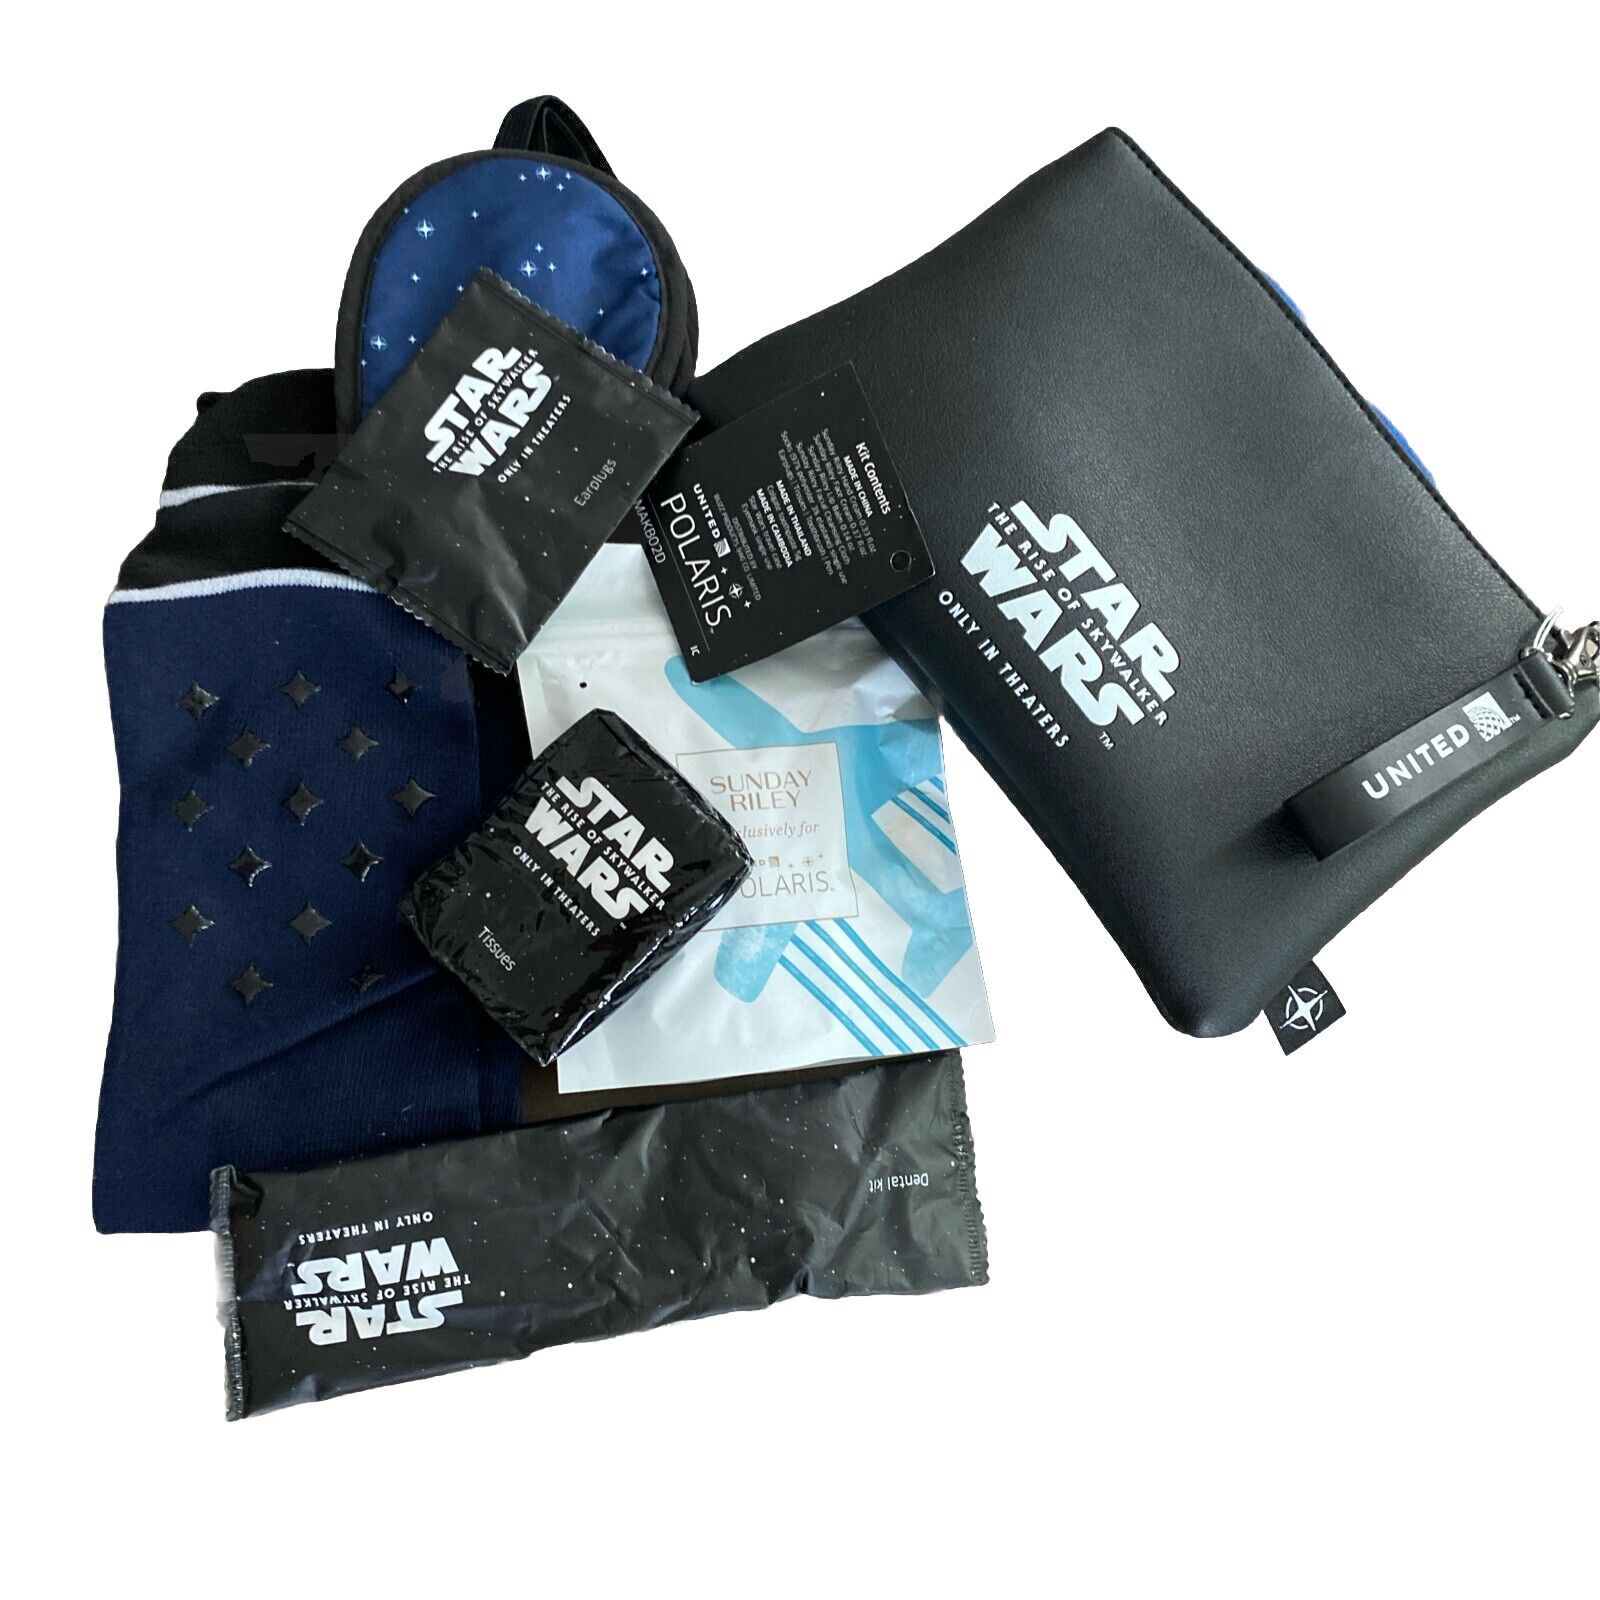 Starwars Star Wars United Airlines Amenity Travel Kit Pouch Bag Rise Of Sky Walk